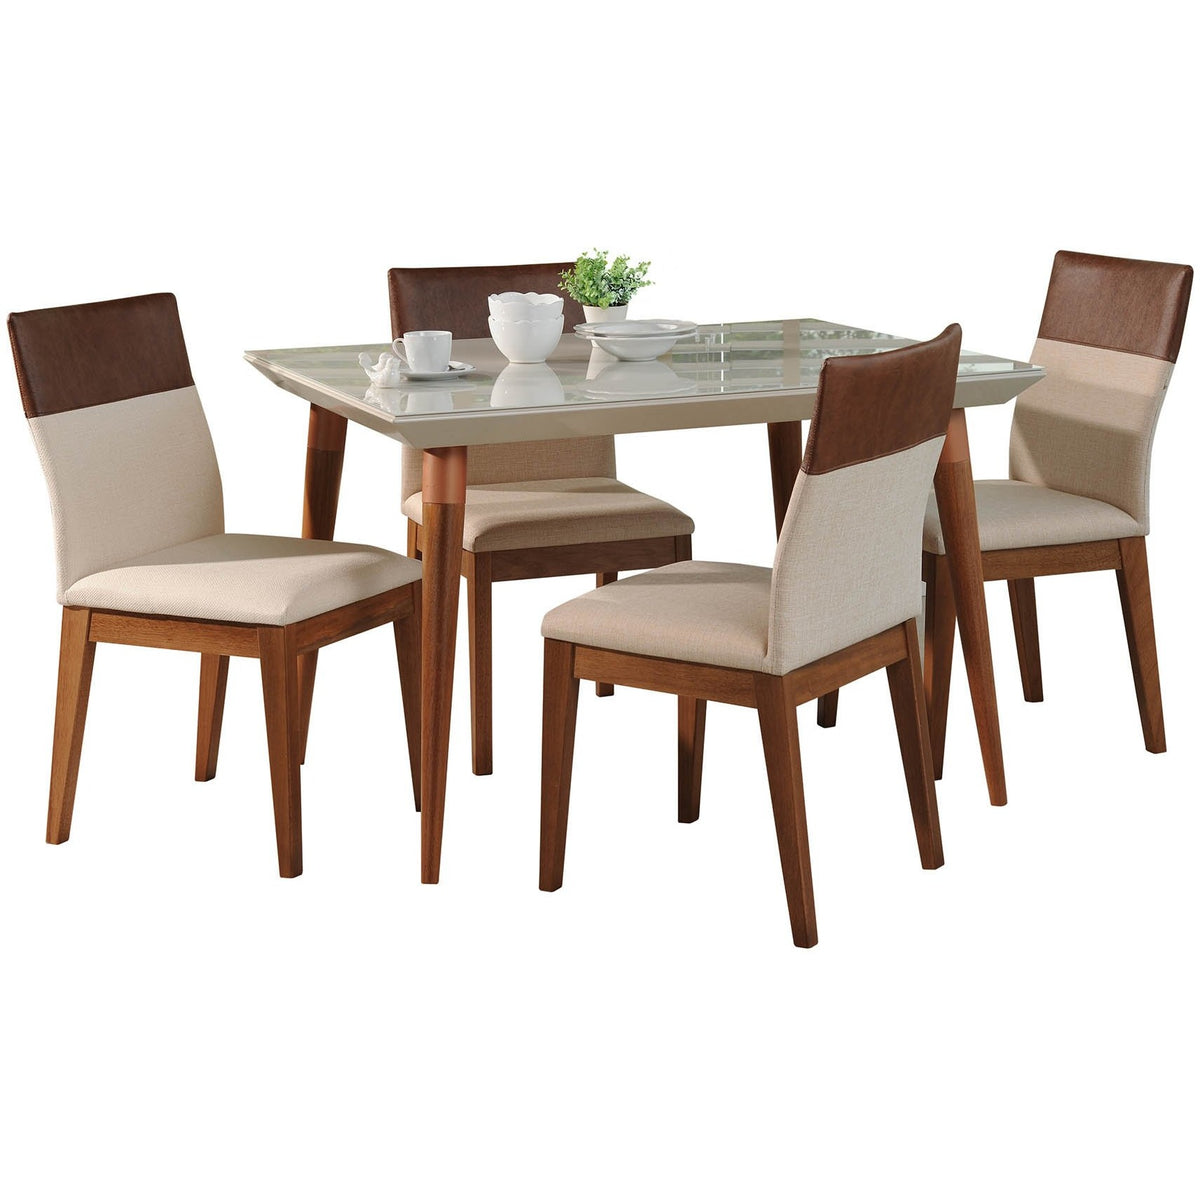 Manhattan Comfort 5-Piece Utopia 47.24" and Duke Dining Set with 4 Dining Chairs in Off White and Dark Beige and Brown-Minimal & Modern